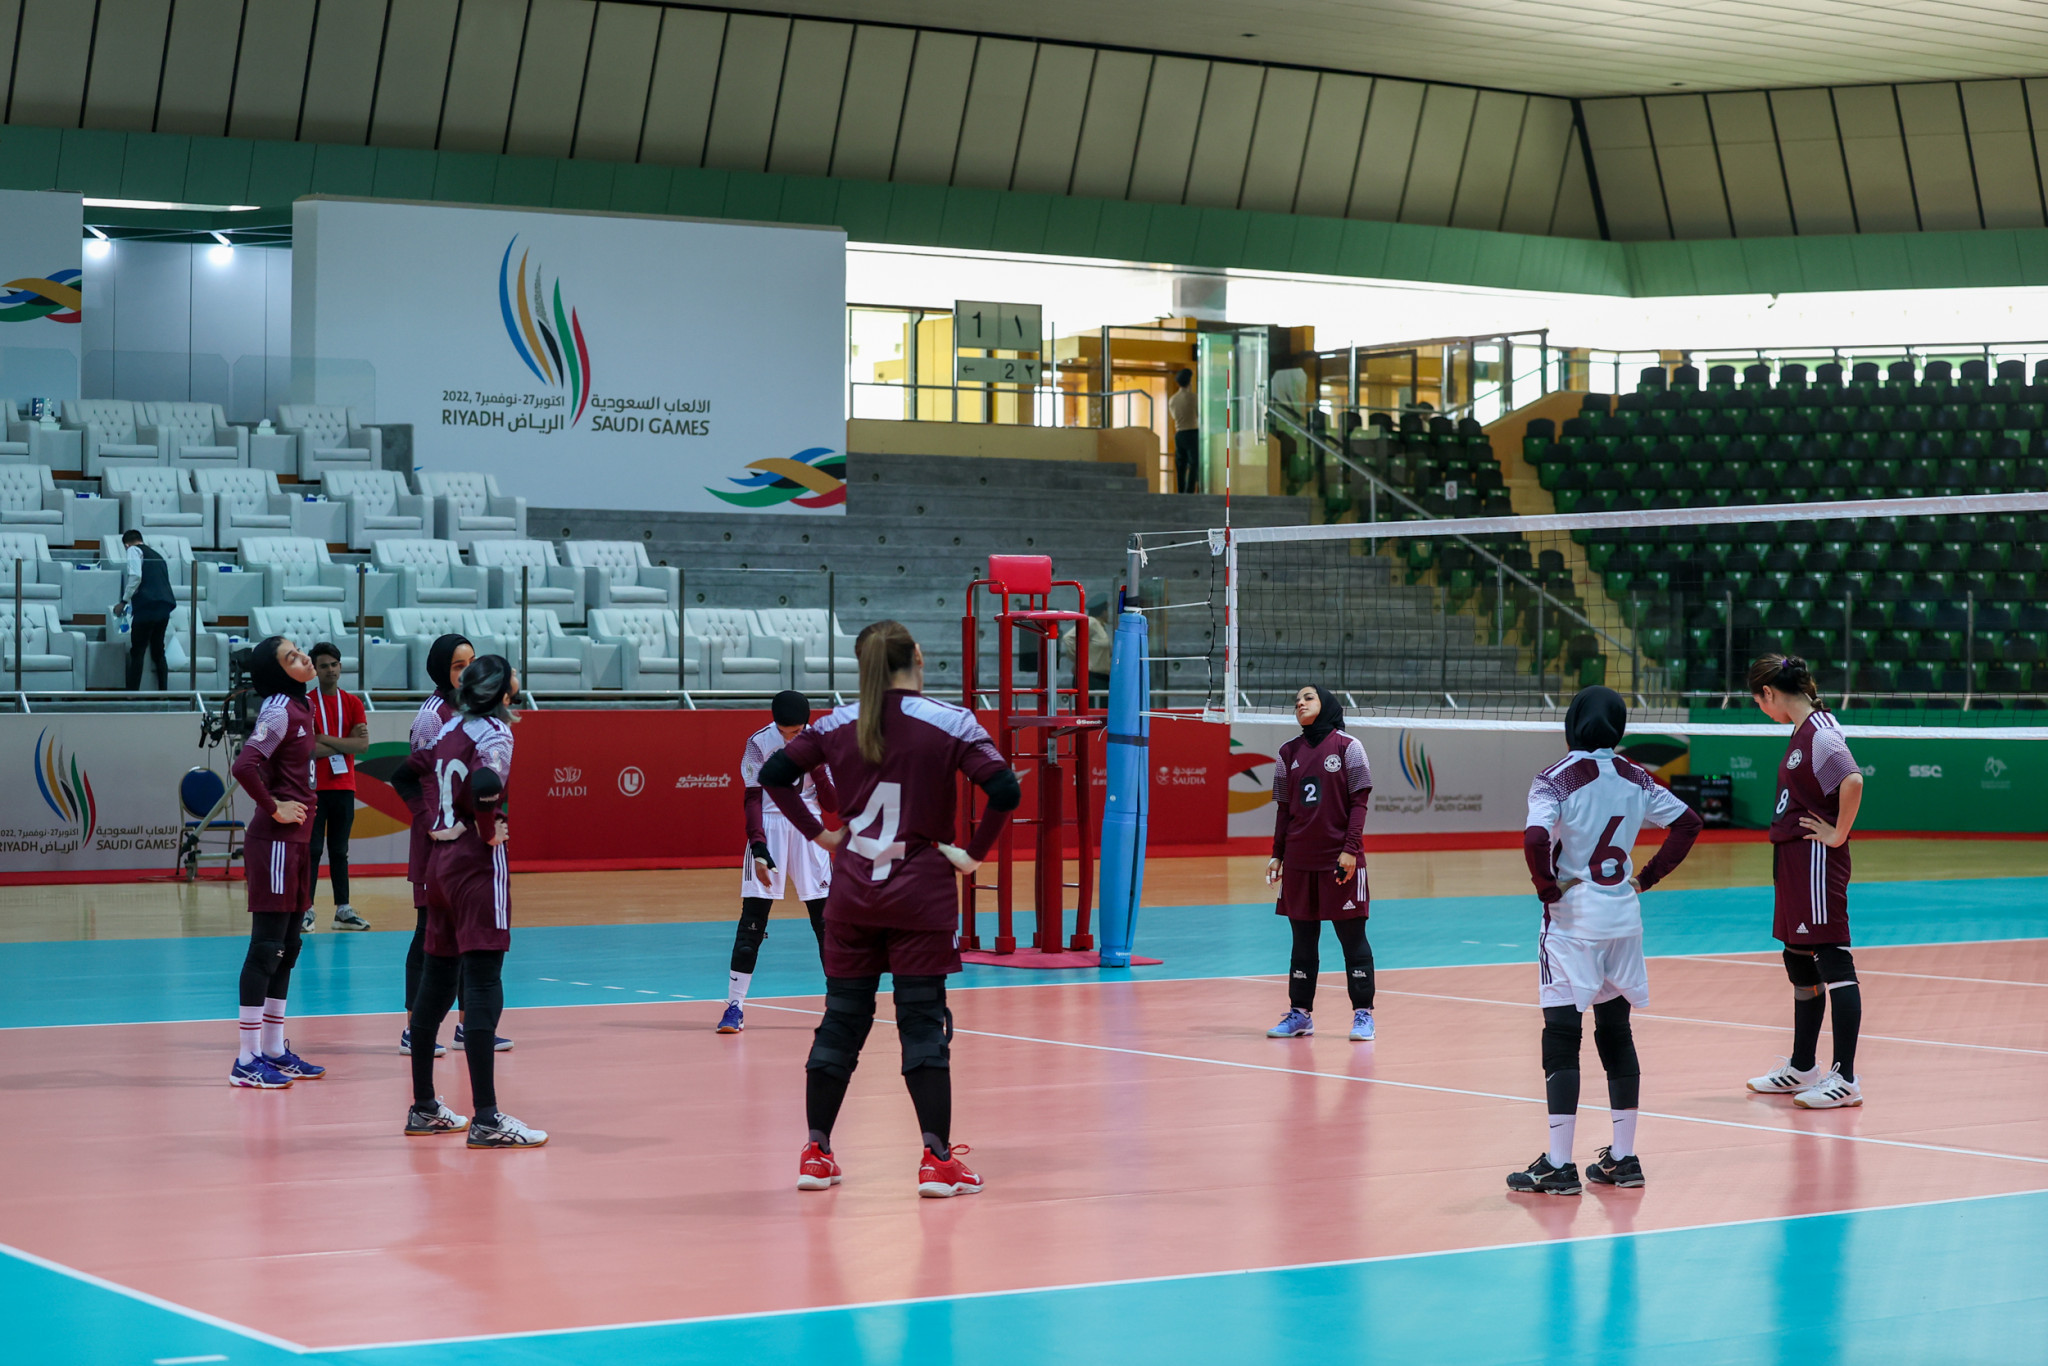 Several women's events are on the Saudi Games programme ©Saudi Games